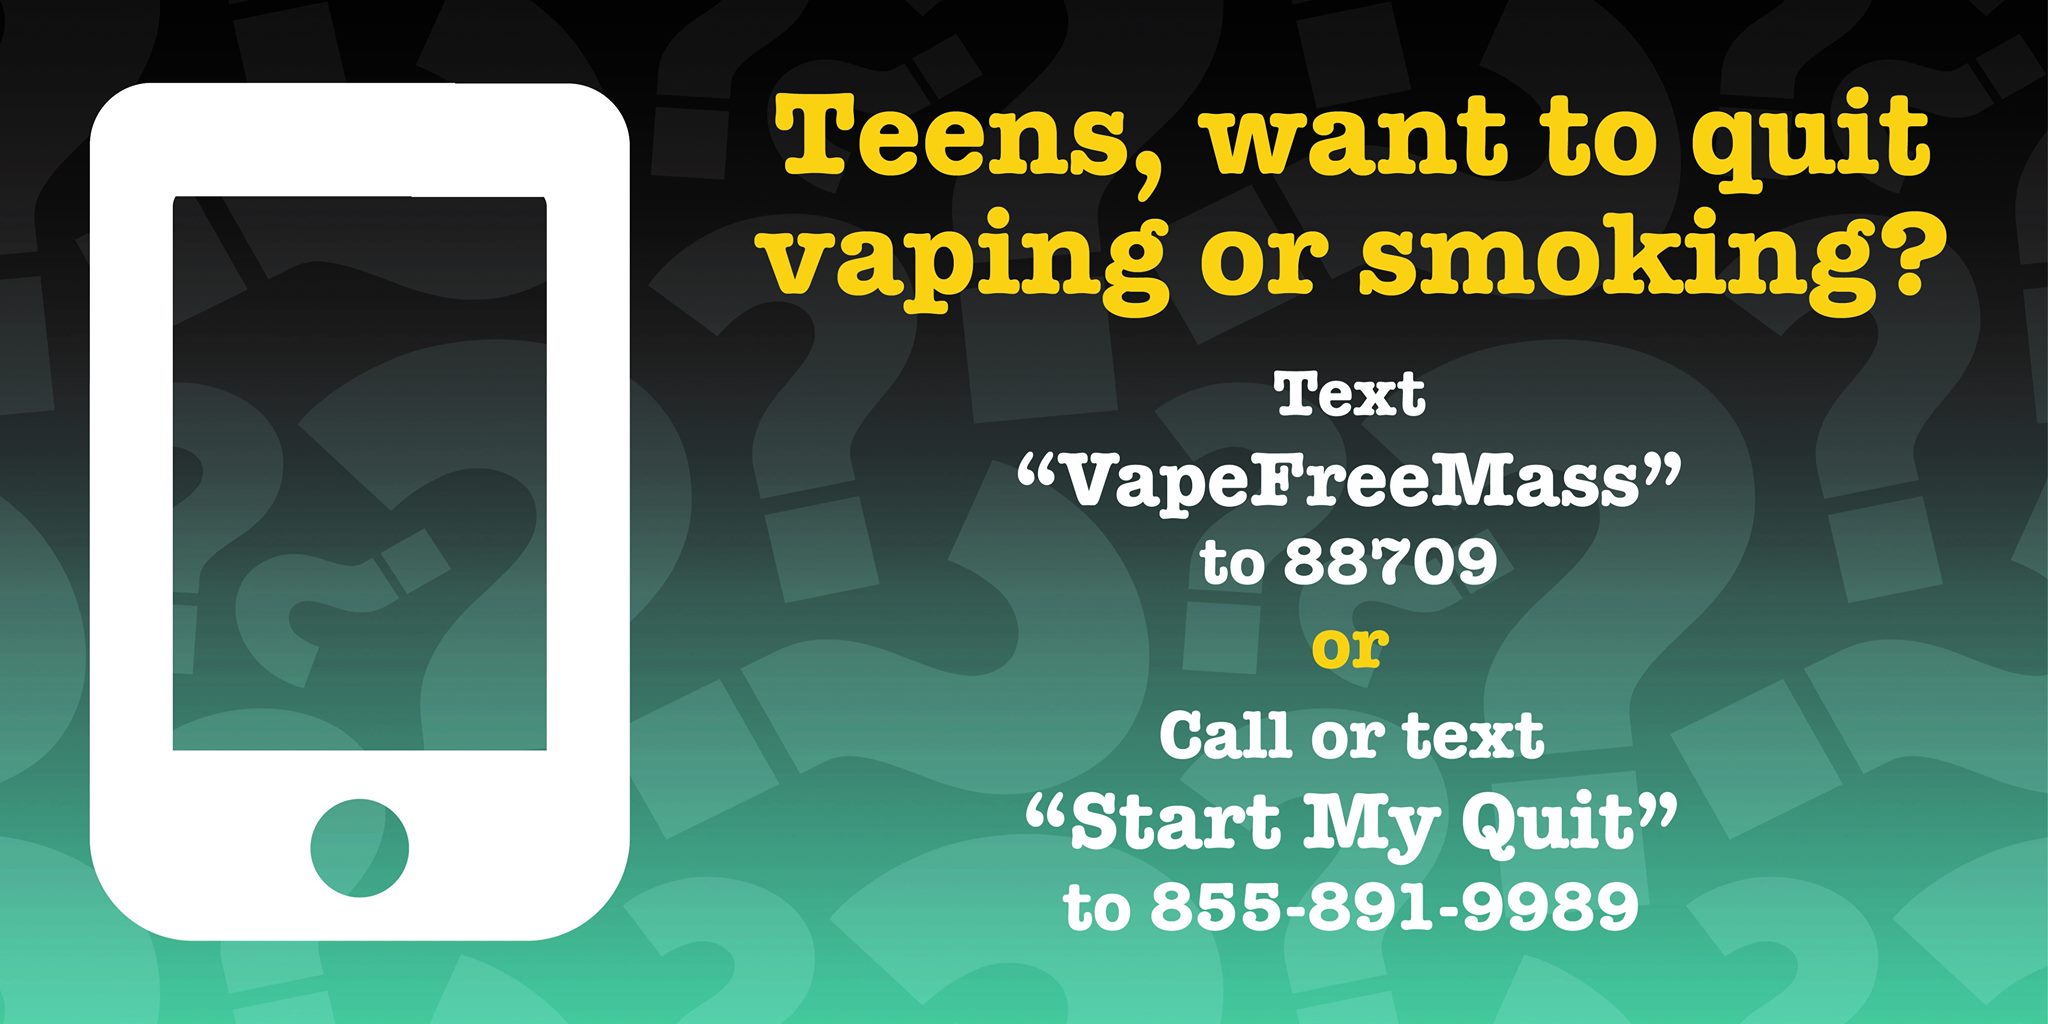 teens want to quit smoking or vaping pic